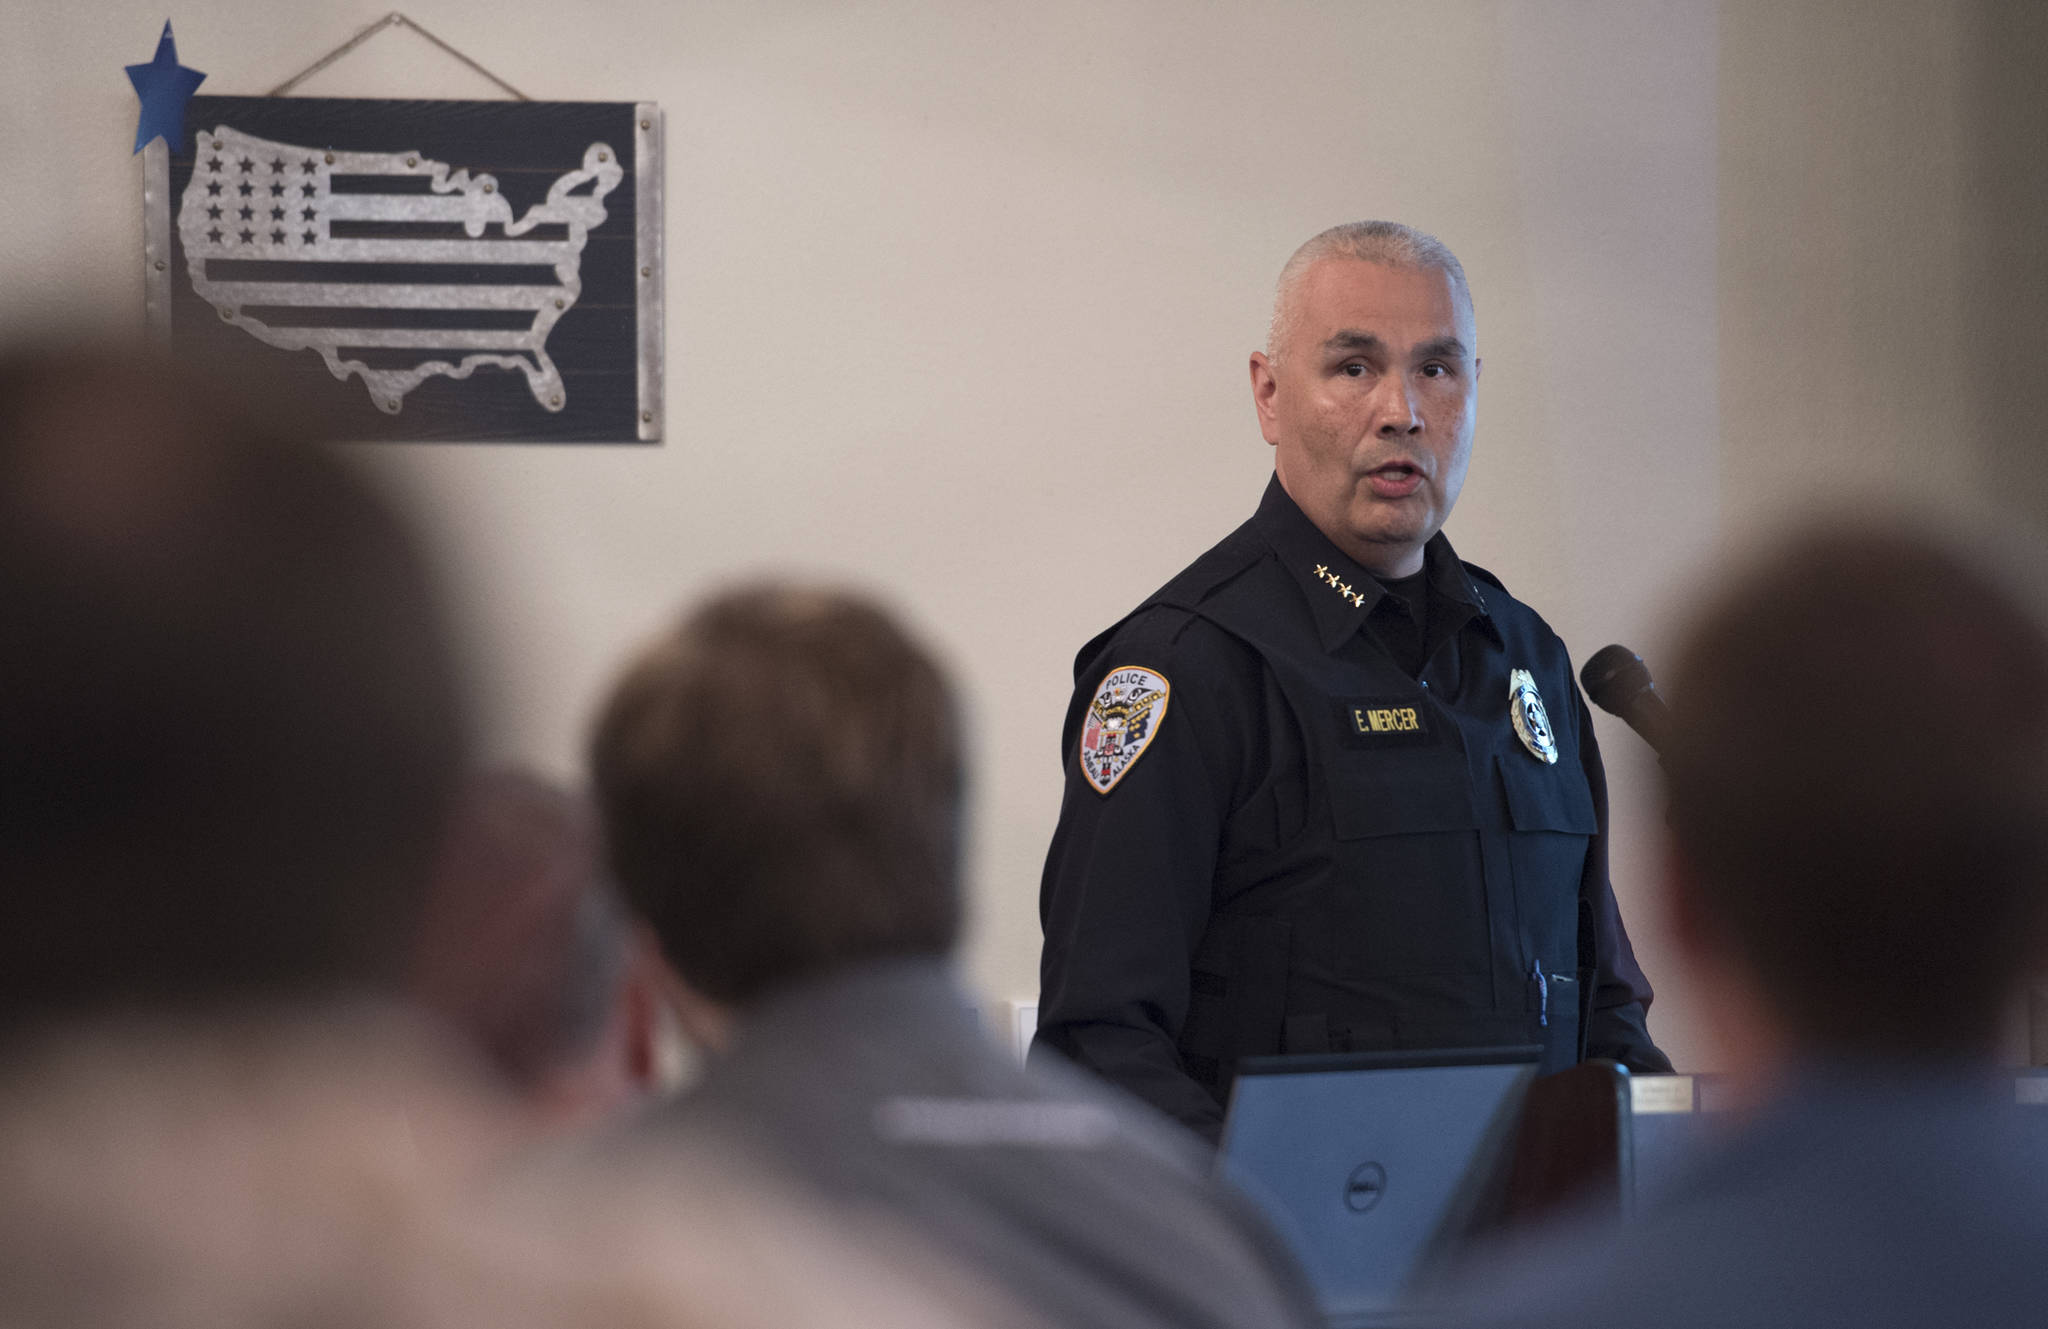 Juneau Police Chief Ed Mercer speaks to the Juneau Chamber of Commerce during its weekly luncheon at the Moose Lodge on Thursday, June 21, 2018. (Michael Penn | Juneau Empire)